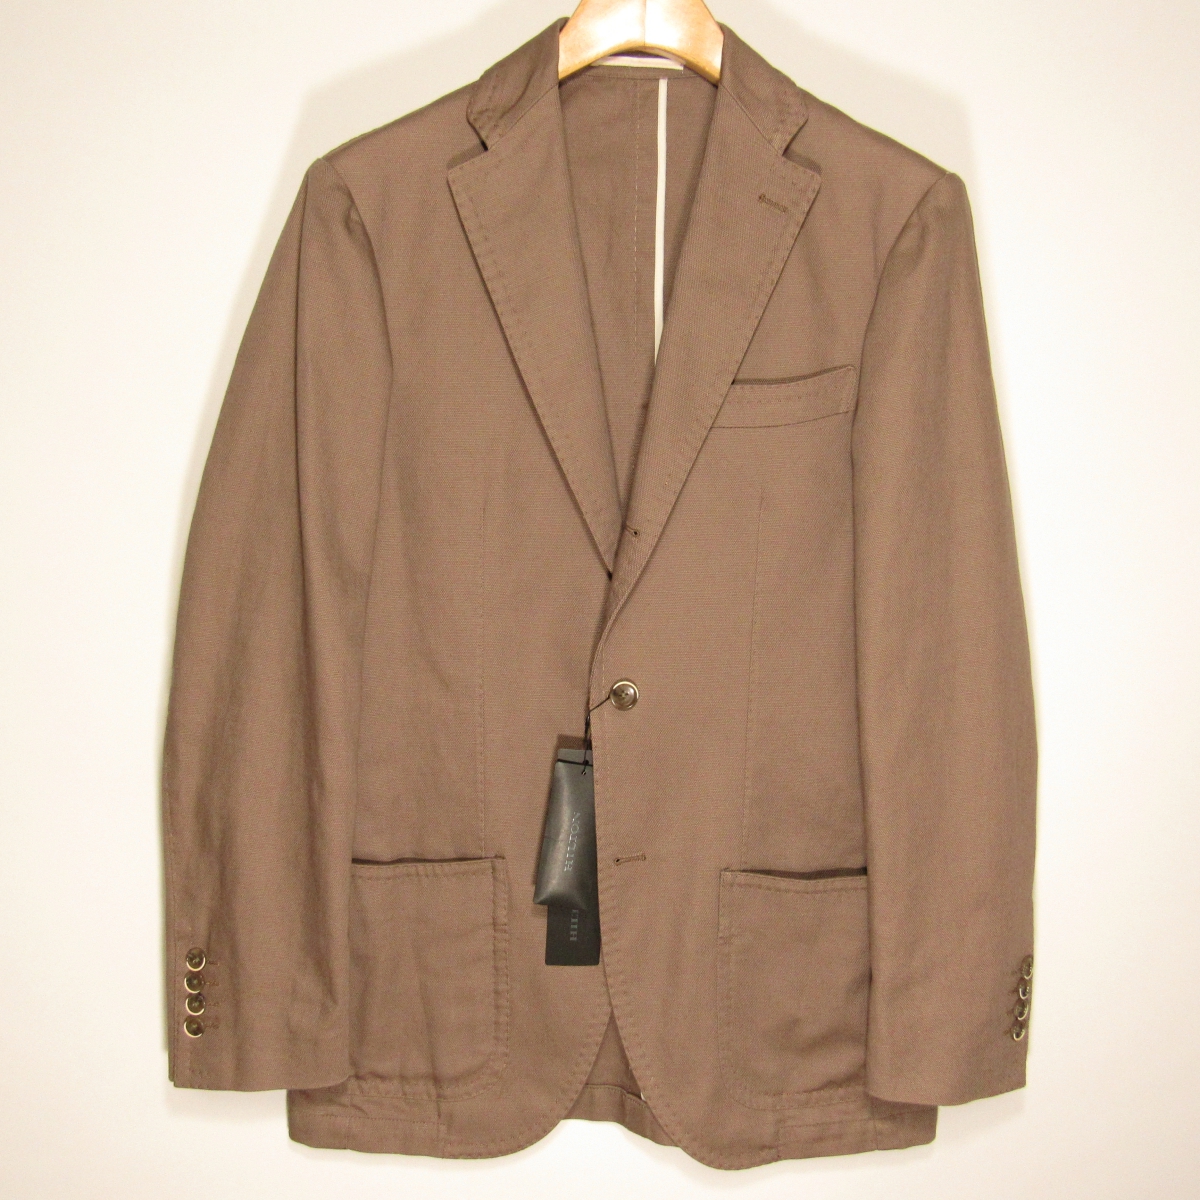 Designed by Ring Jacket Hill ton HILTON tailored jacket 